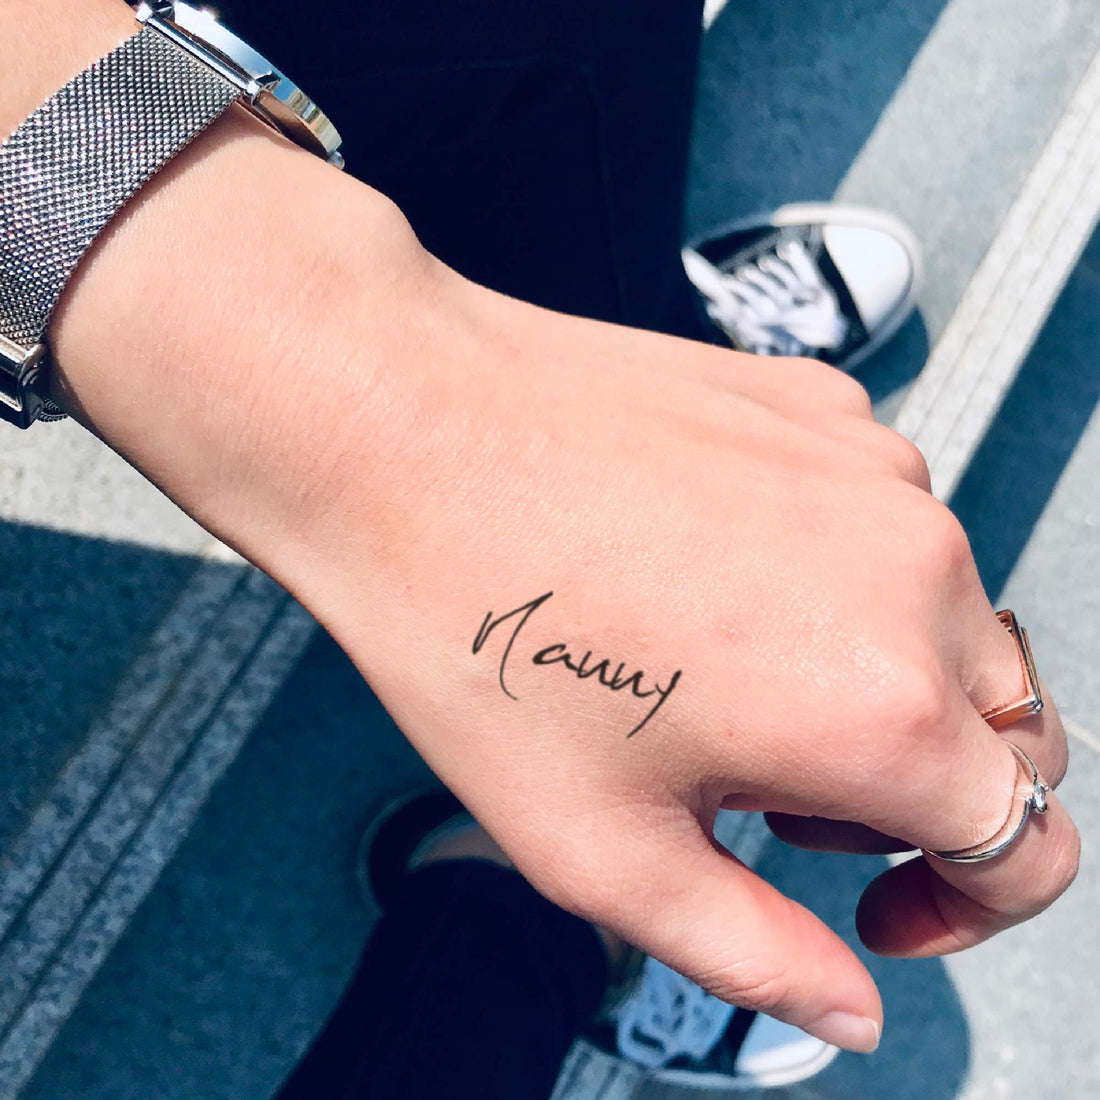 Nanny custom temporary tattoo sticker design idea inspiration meanings removal arm wrist hand words font name signature calligraphy lyrics tour concert outfits merch accessory gift souvenir costumes wear dress up code